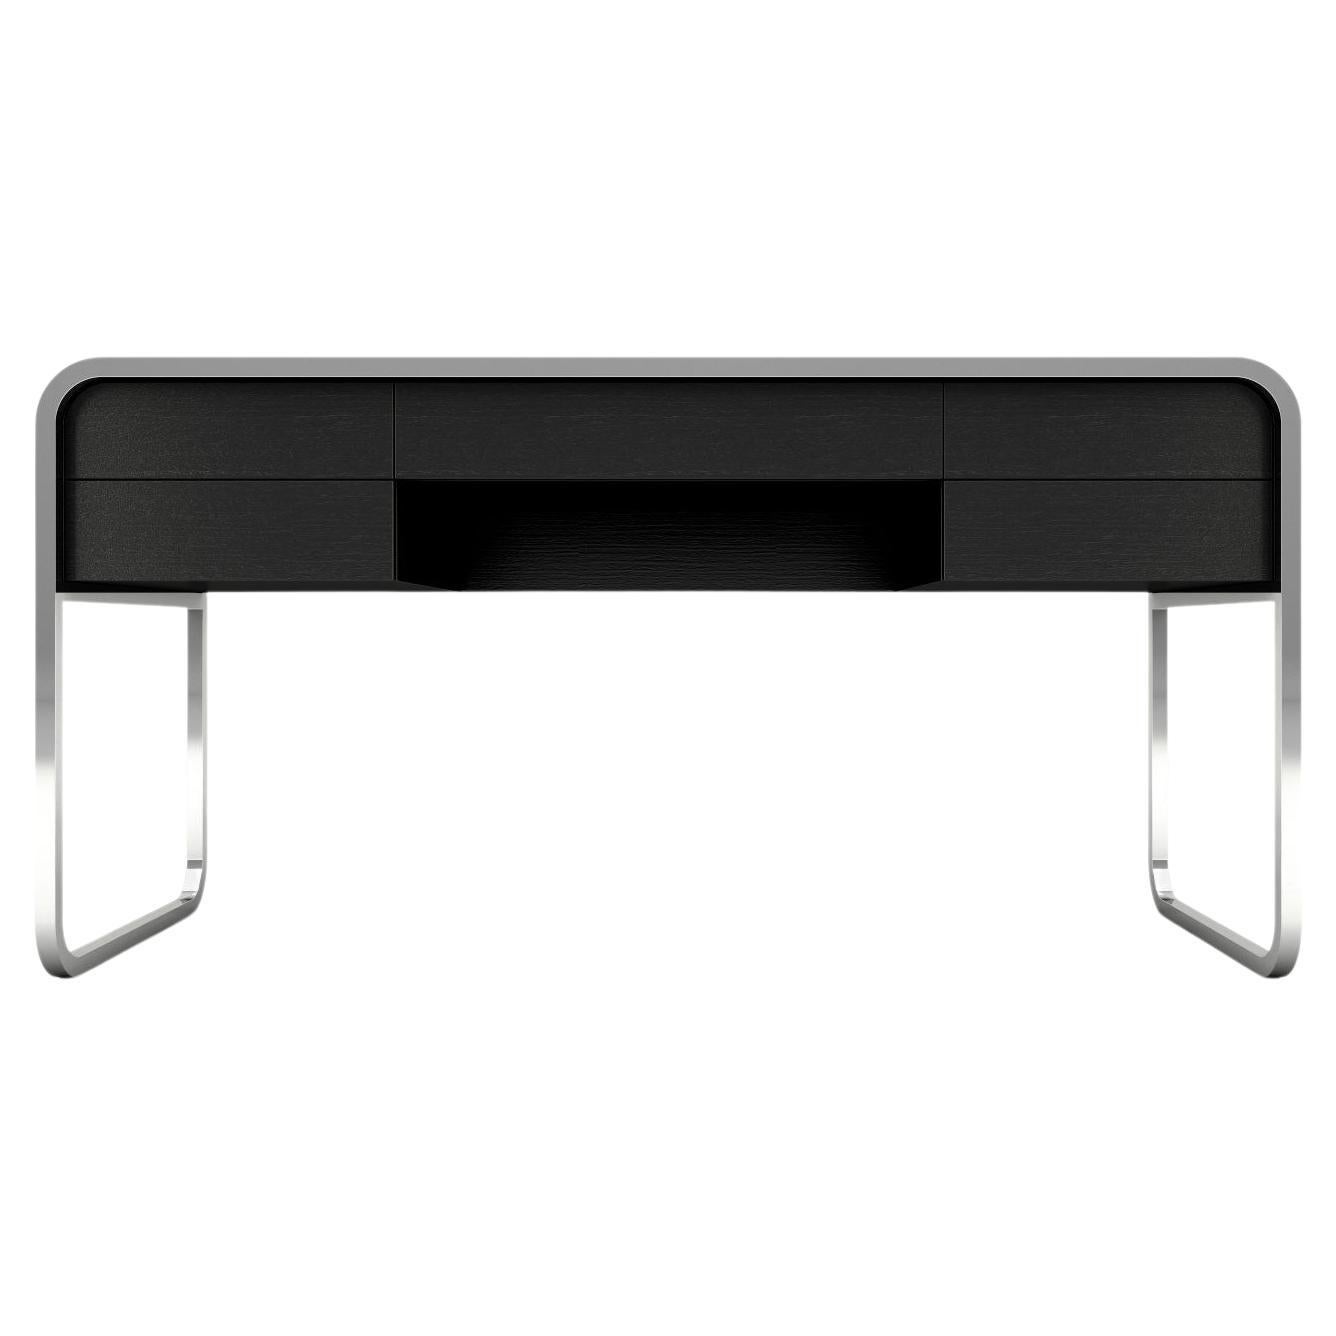 Midnight Desk - Modern Black Lacquered Desk with Stainless Steel Legs